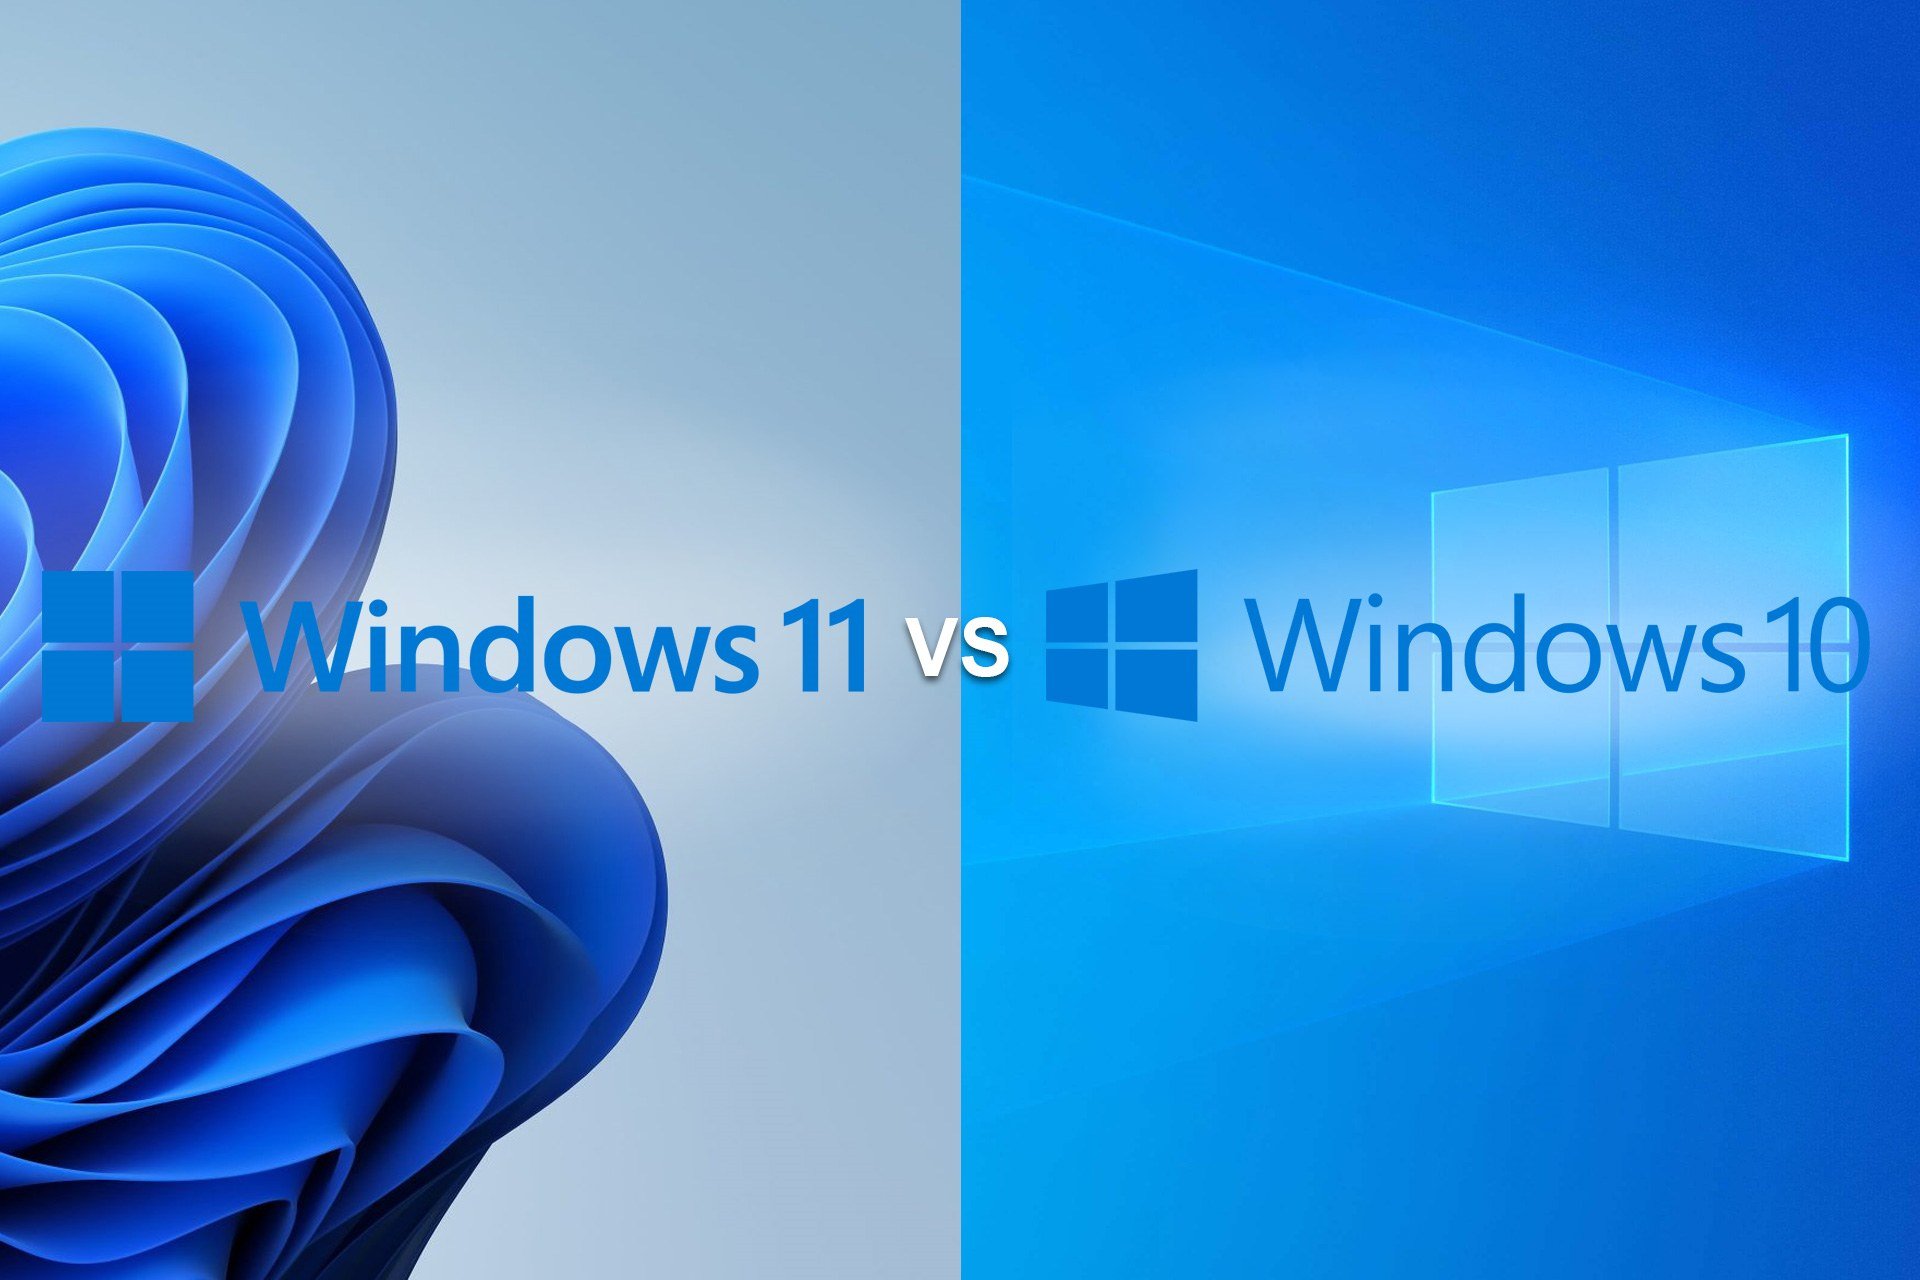 Is Windows 11 smoother than 10?